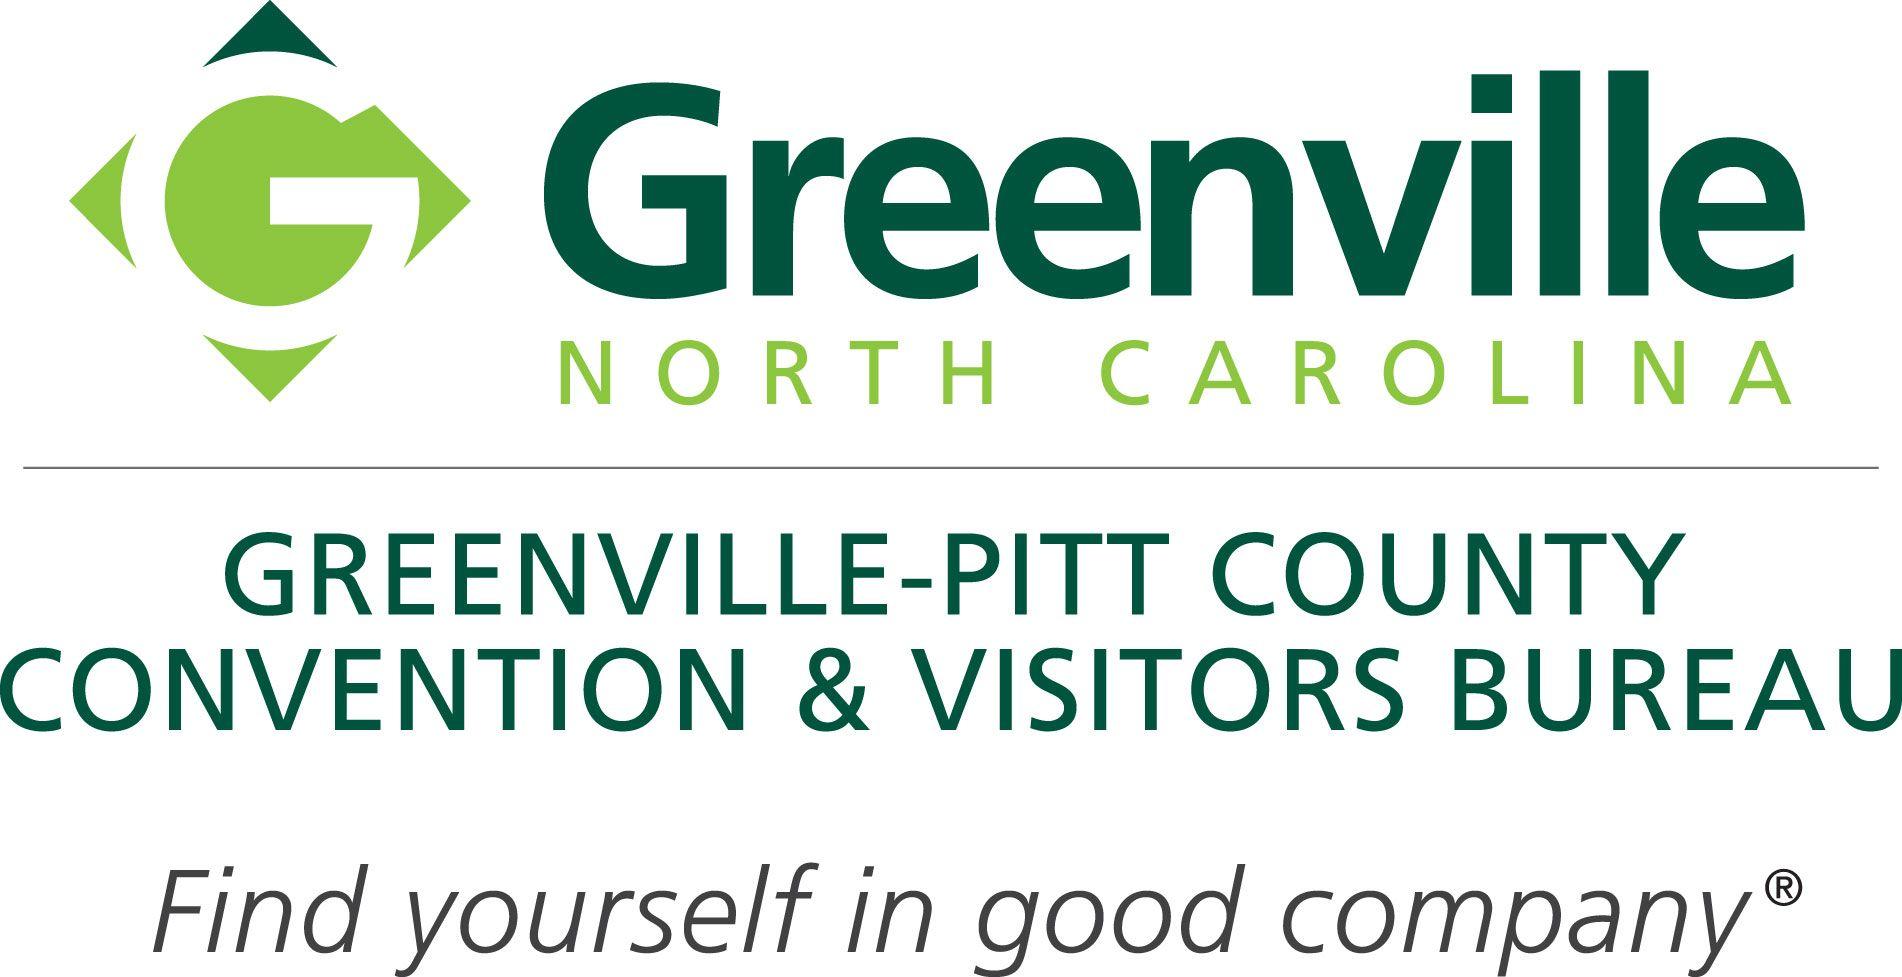 Greenville Logo - Home - Greenville-Pitt County Convention and Visitors Bureau